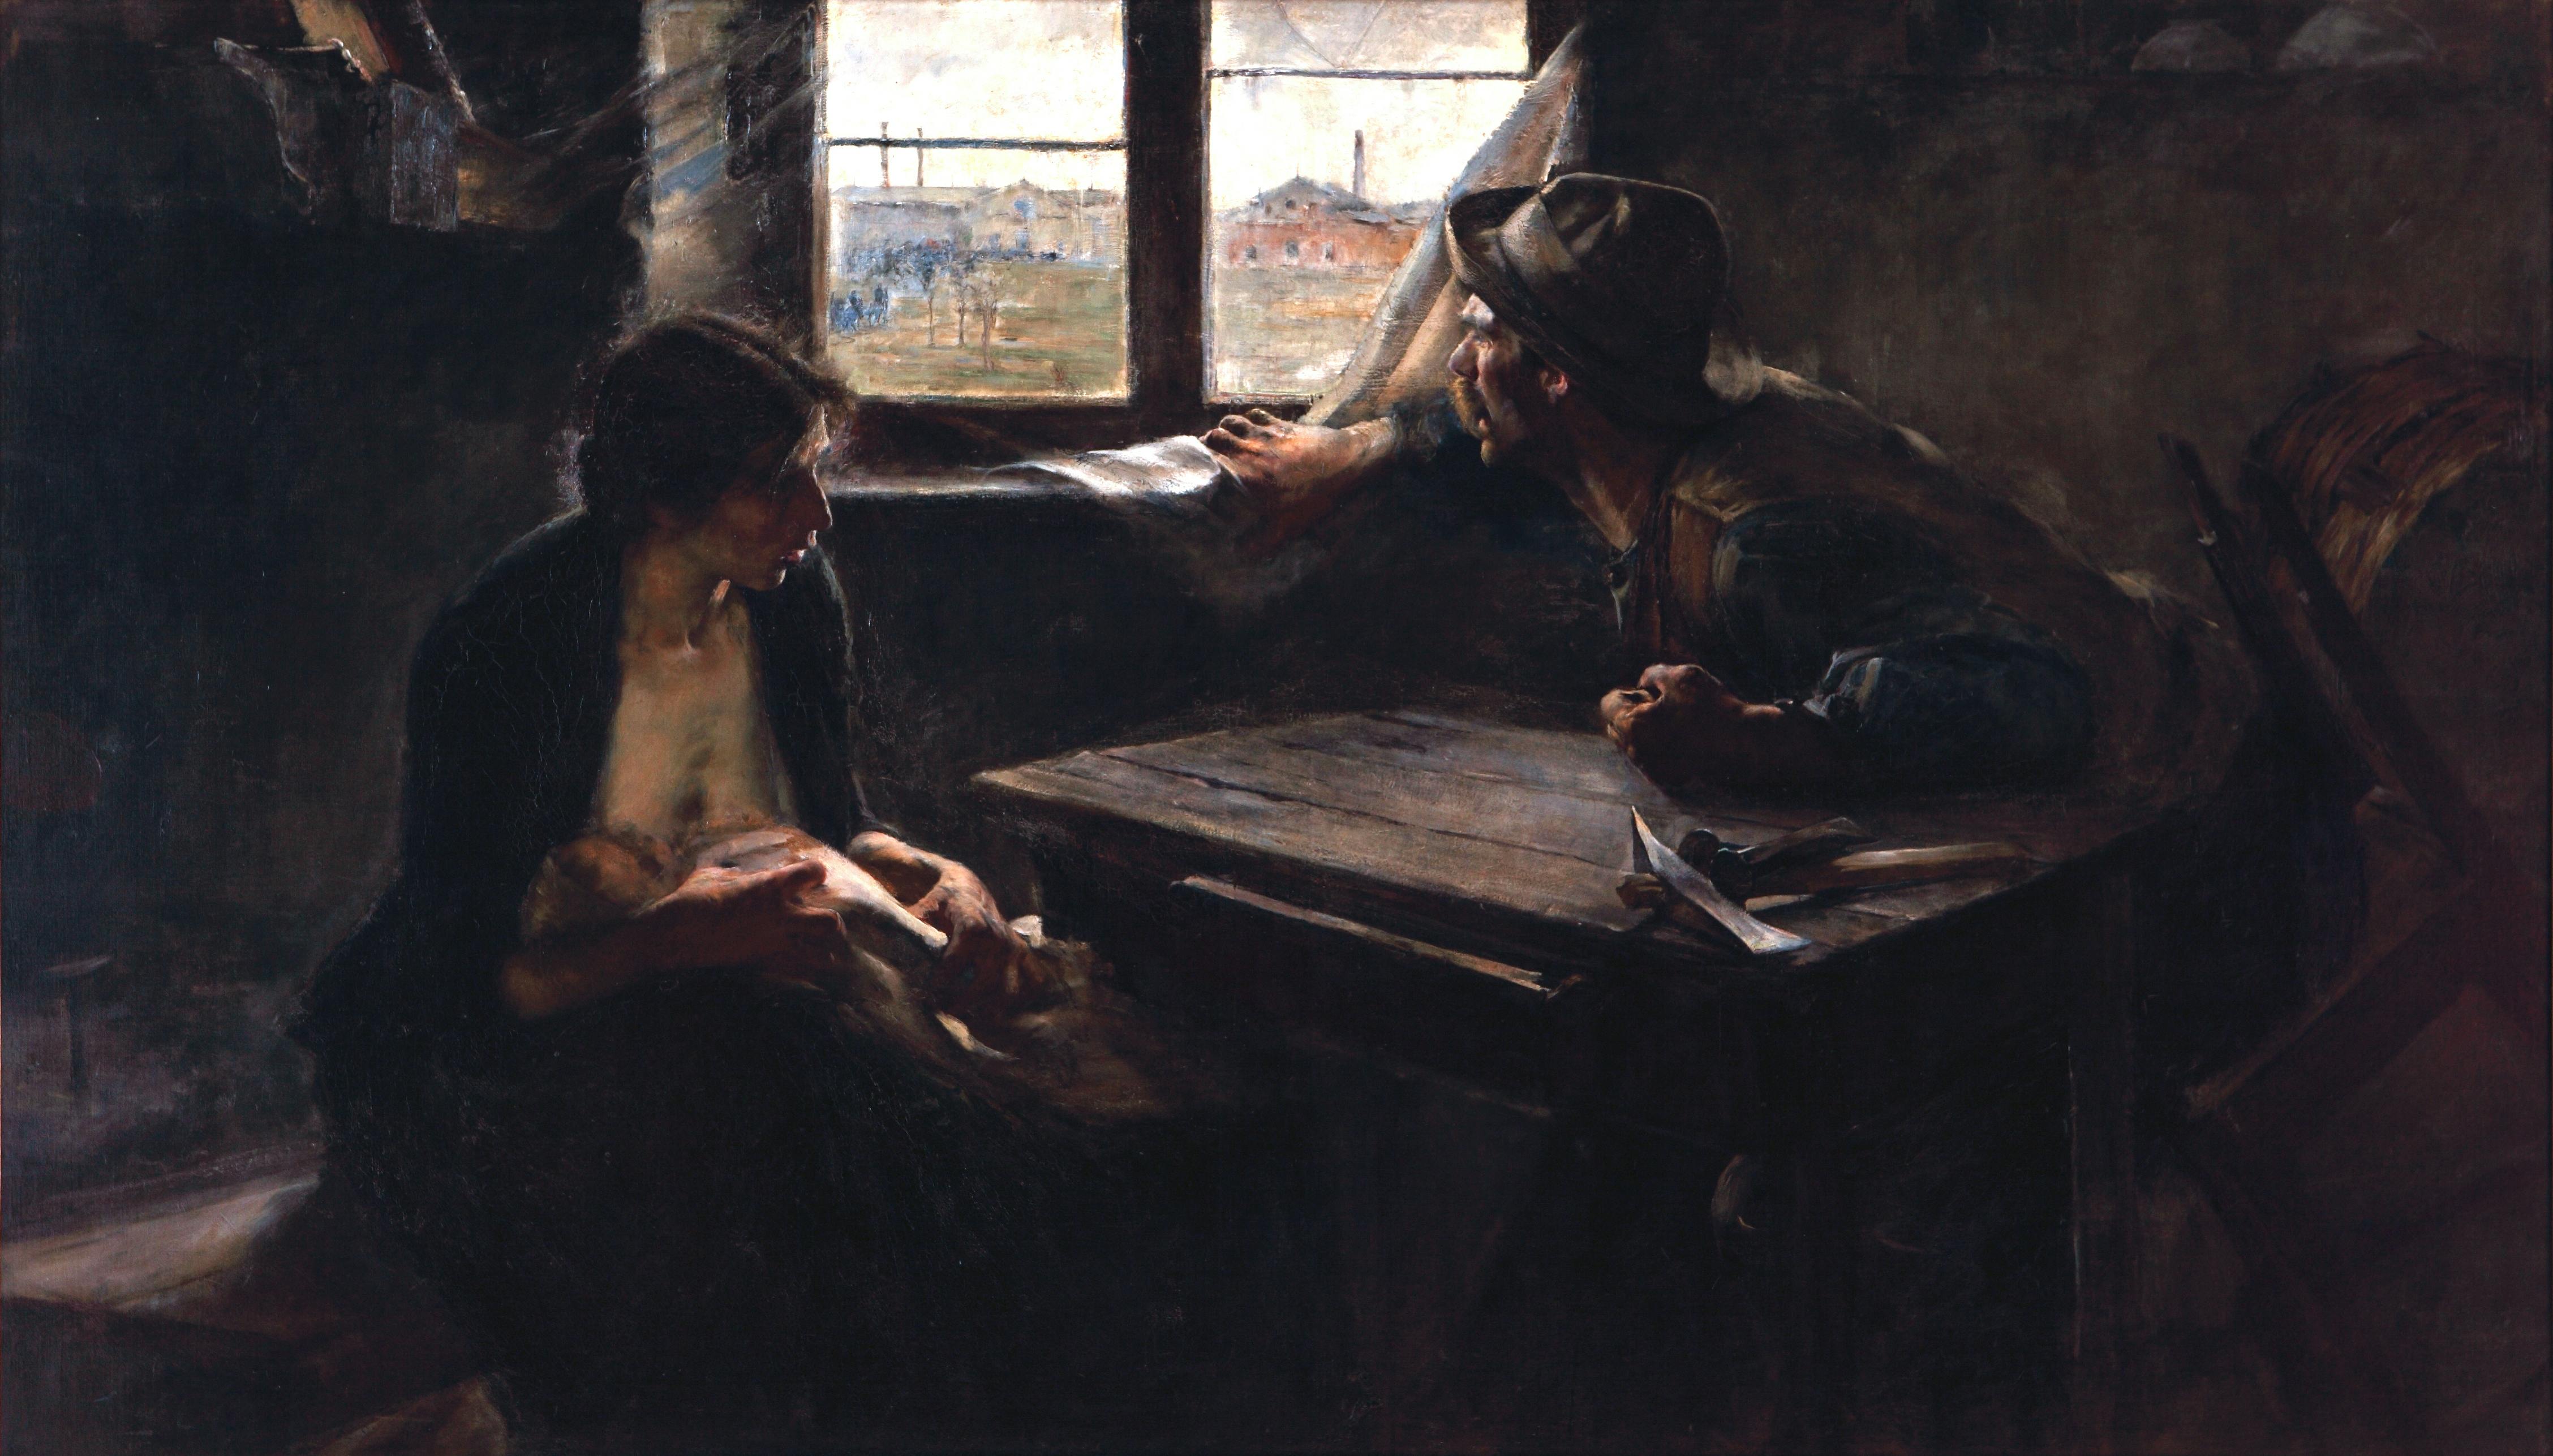 Oil on canvas painting of a woman breastfeeding a baby, and a man looking out of the window, in a dark domestic interior..